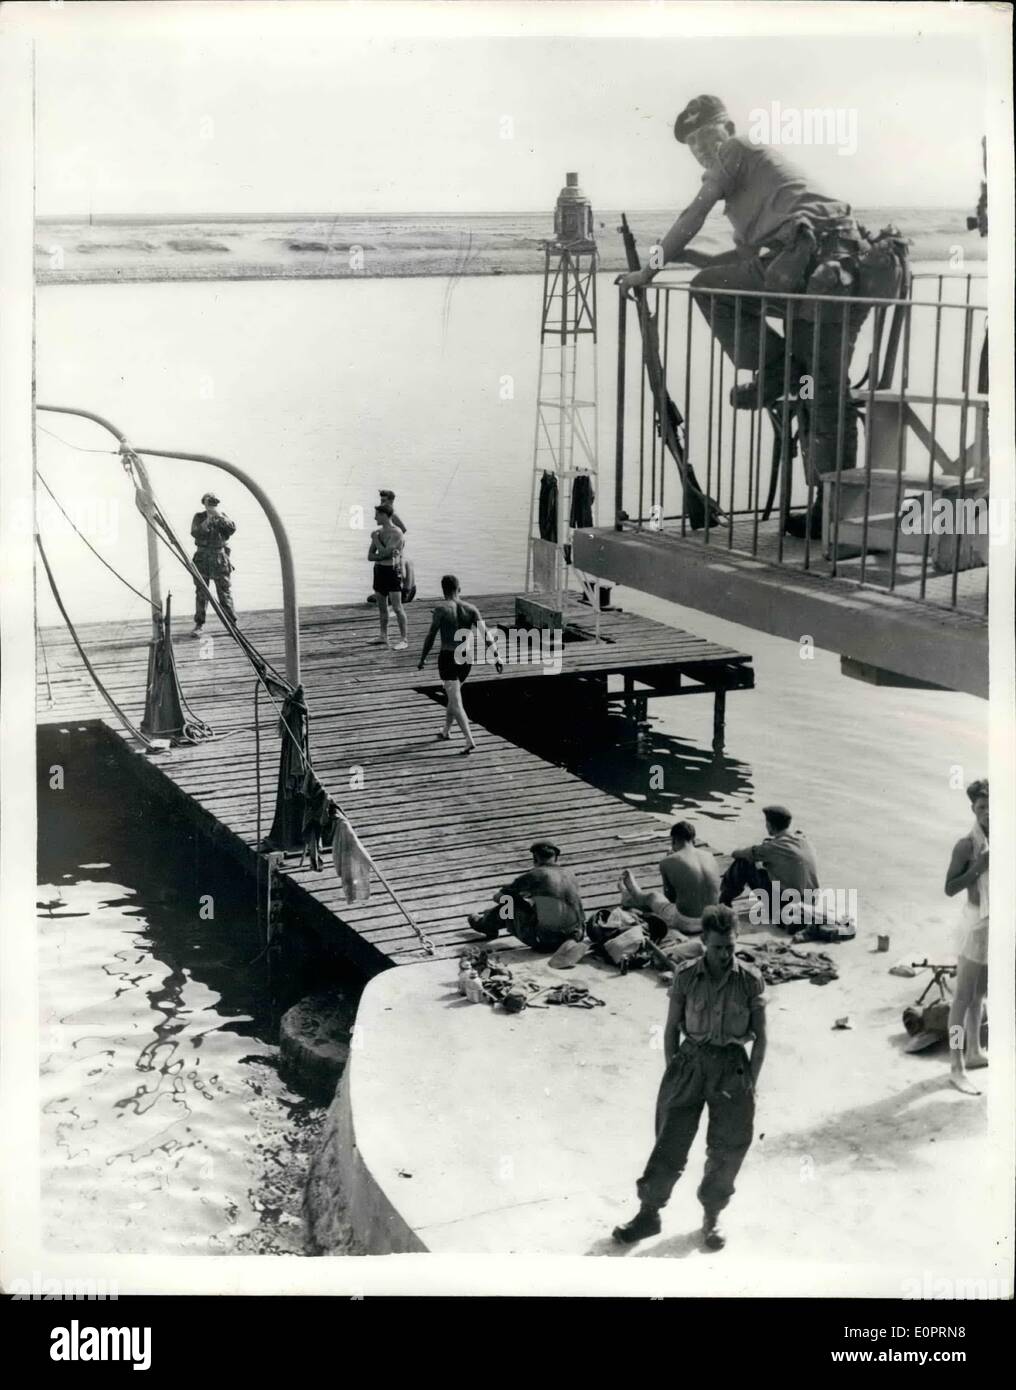 Nov. 11, 1956 - British Troops Relax - In Suez. Go for a Swim at El Capitation: Photo shows A party of British troops take a swim at El Capitation - station of the Suez Canal Company - while one of their number keeps a wary look our for snipers - during the lull between capture of the Suez area by British and French Troops - and the taking over by Uno Police Force. Stock Photo